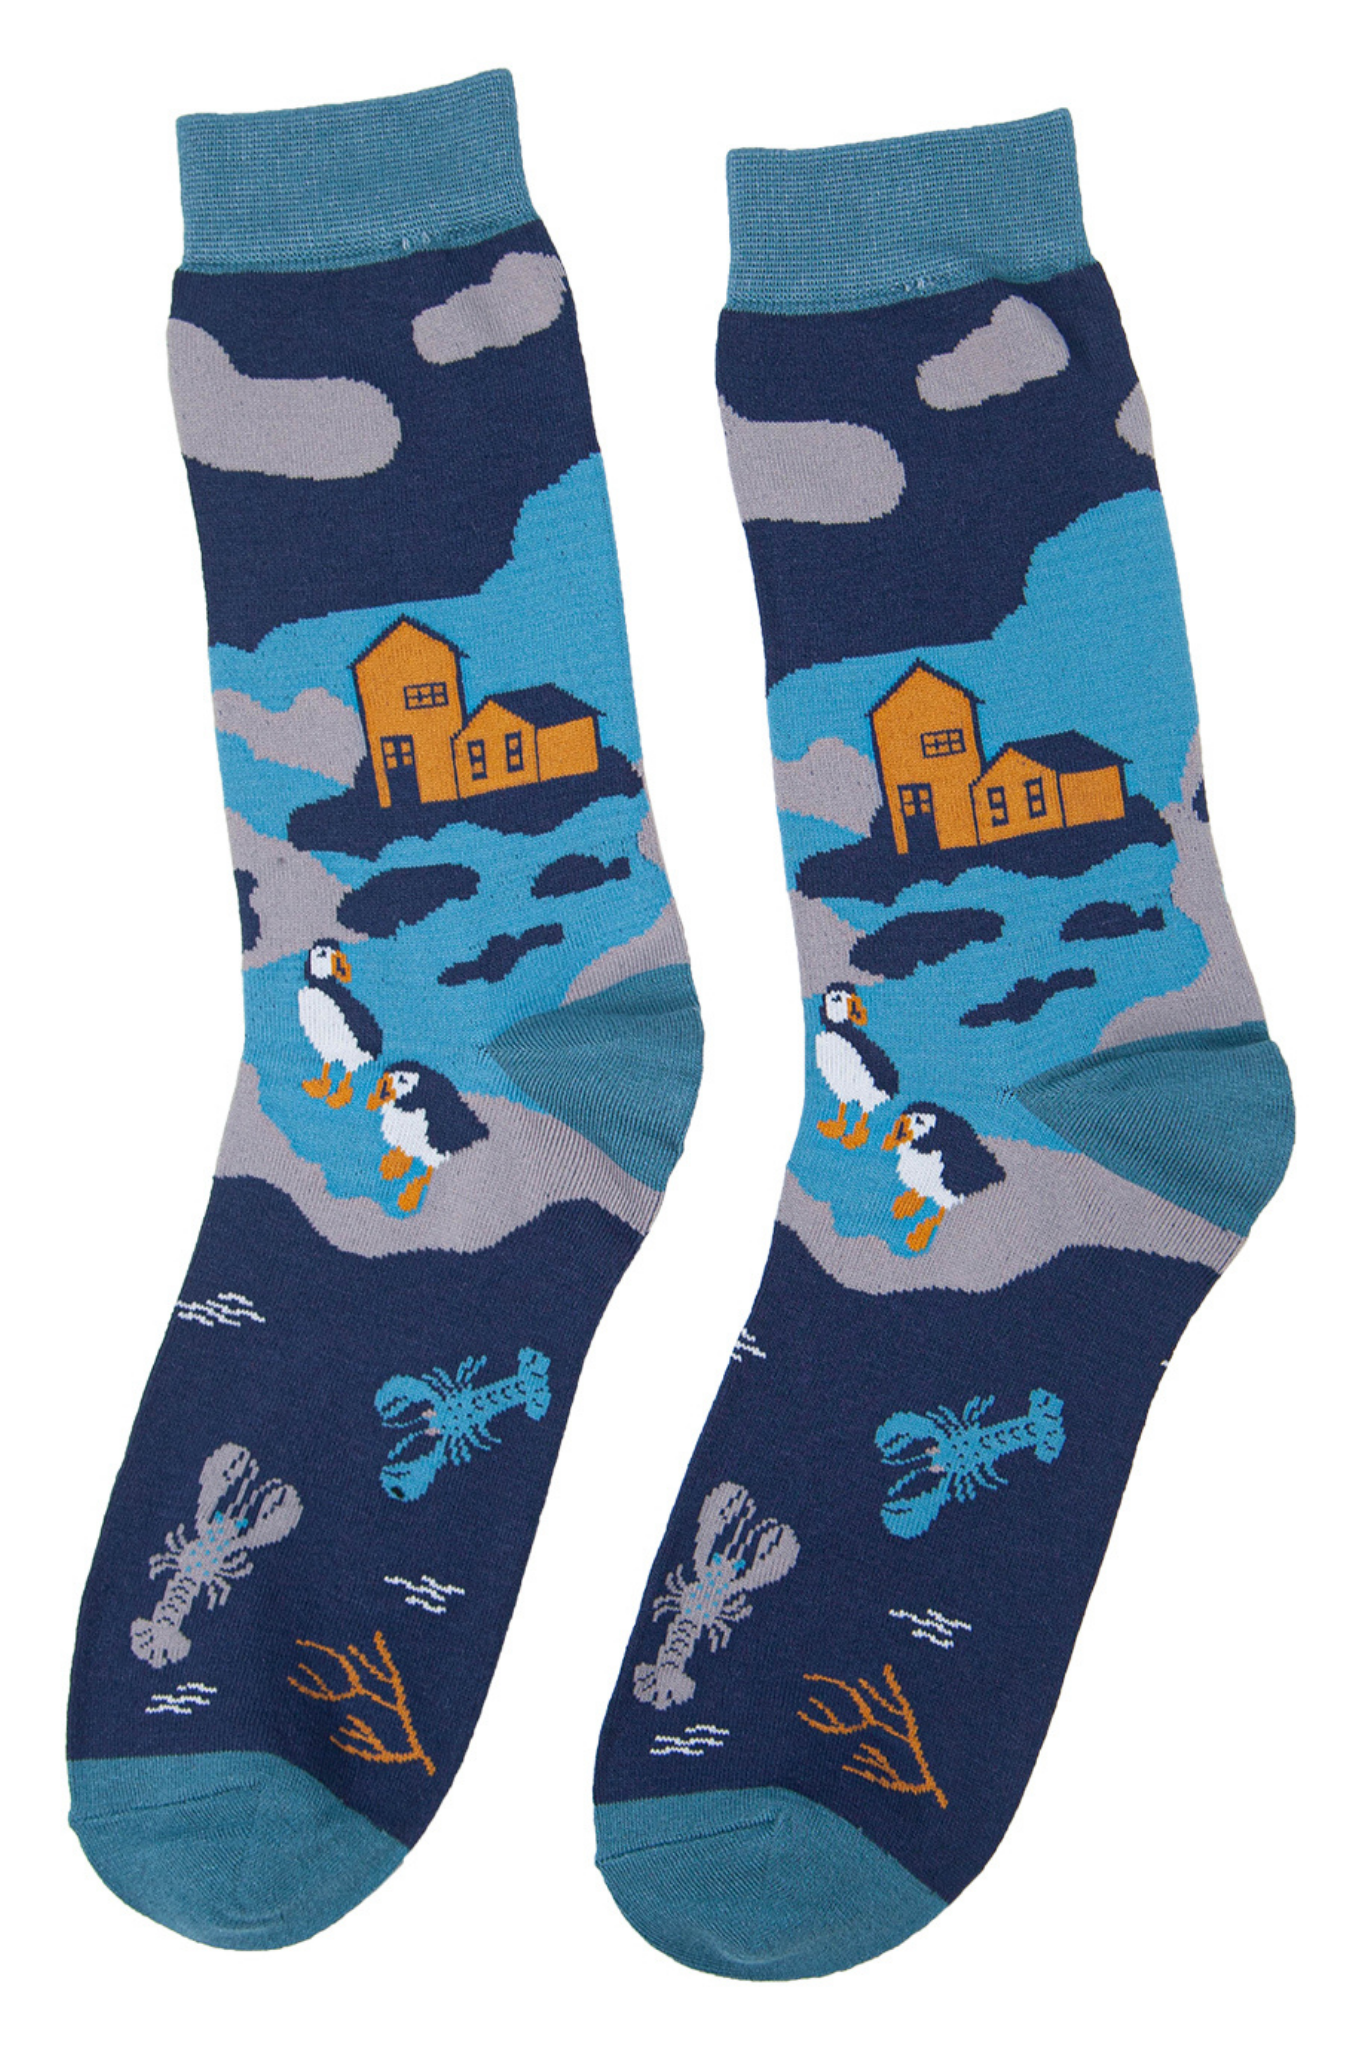 blue dres socks with puffin birds, lobsters and a shoreline